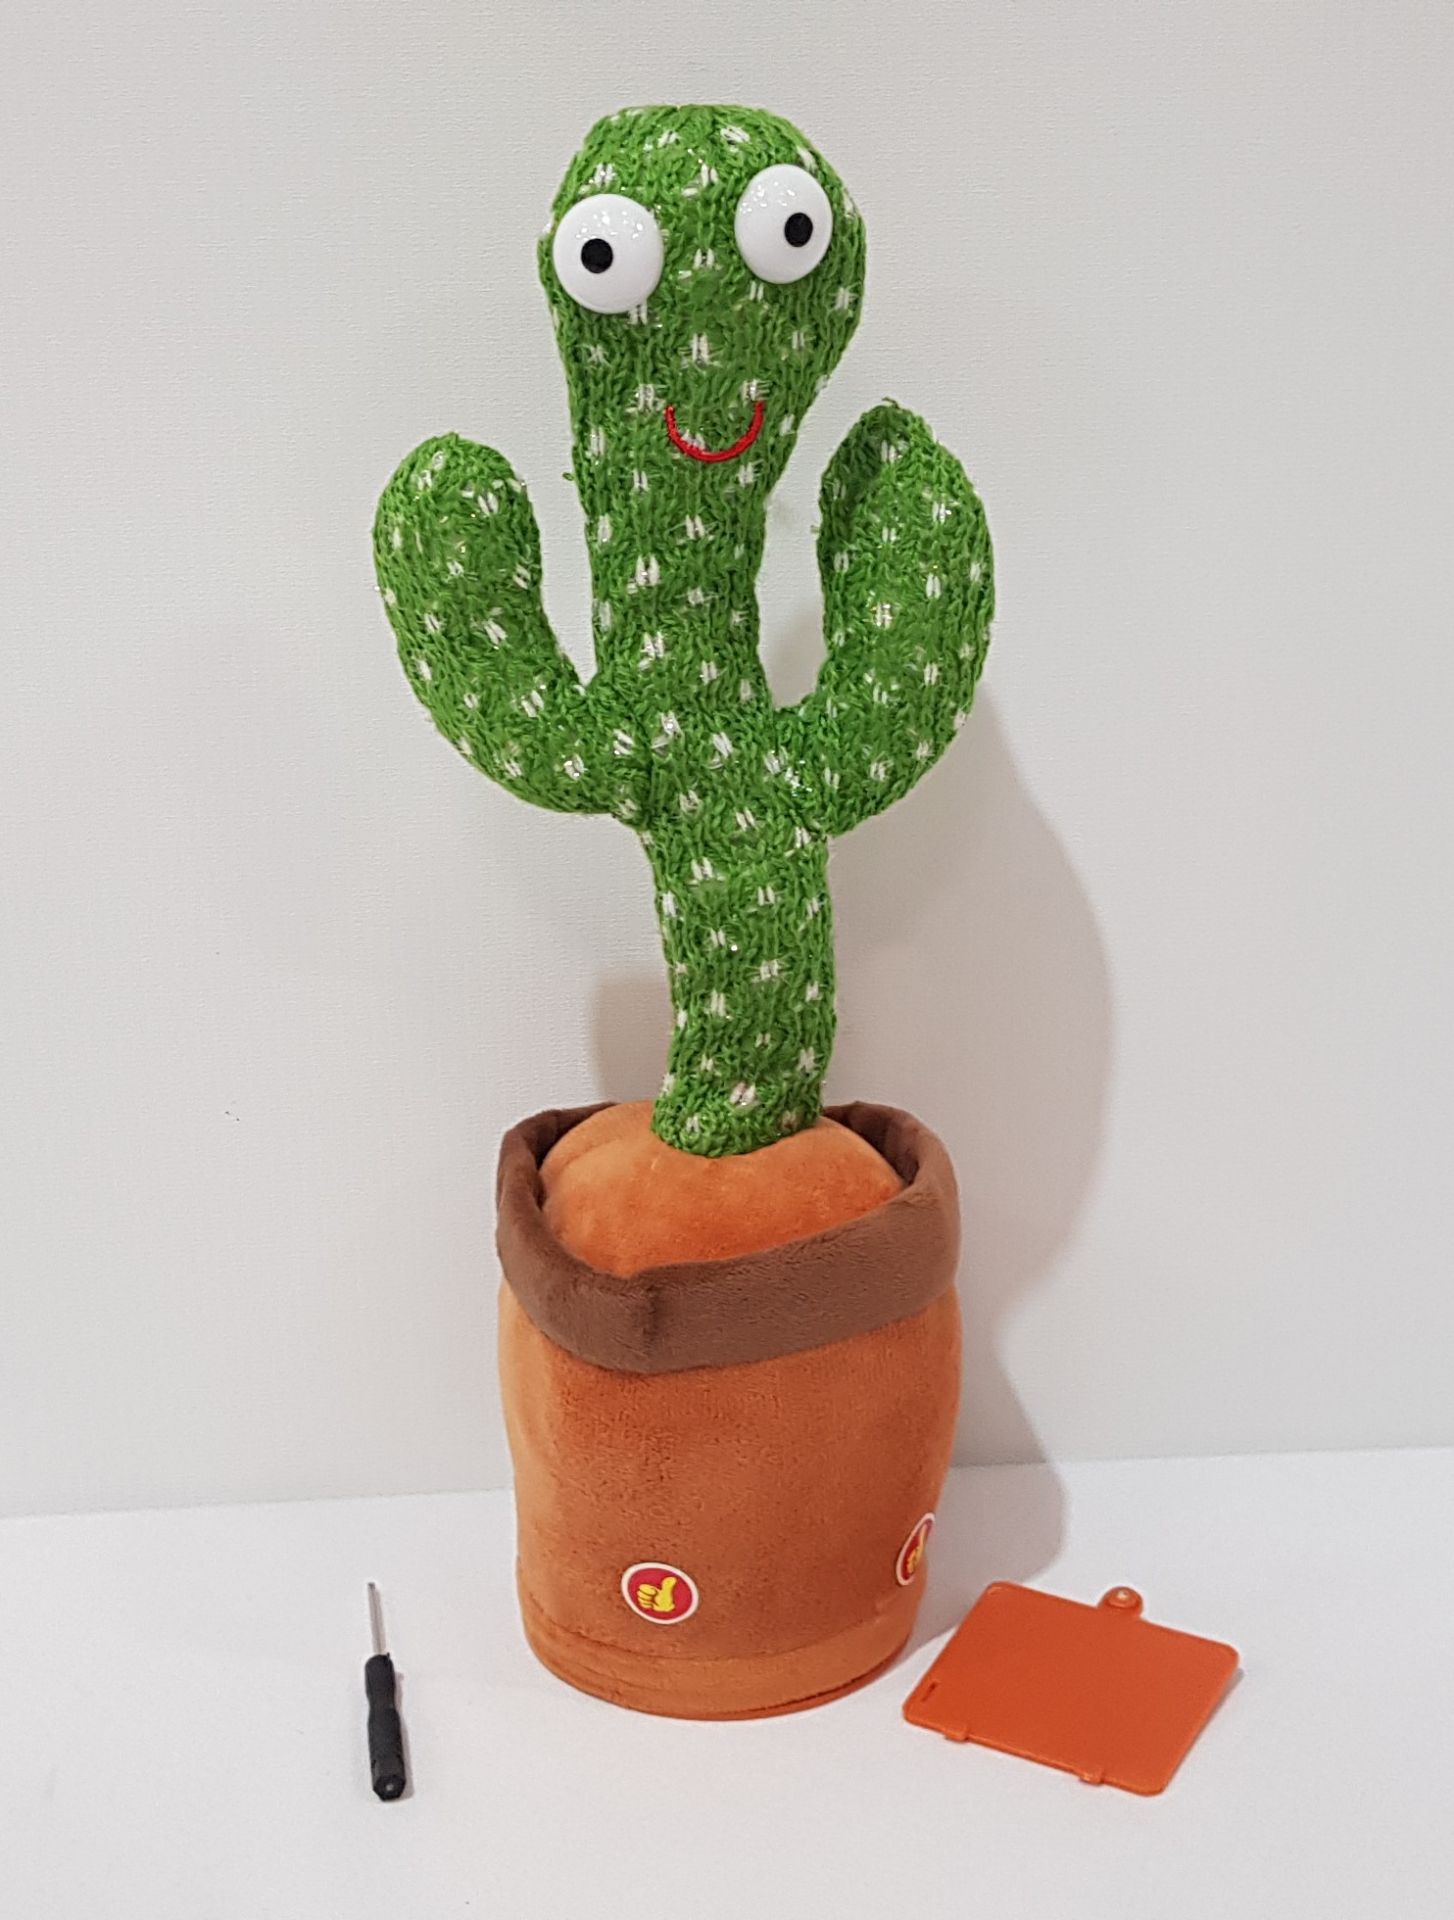 100 X BRAND NEW DANCING CACTUS IN 2 BOXES